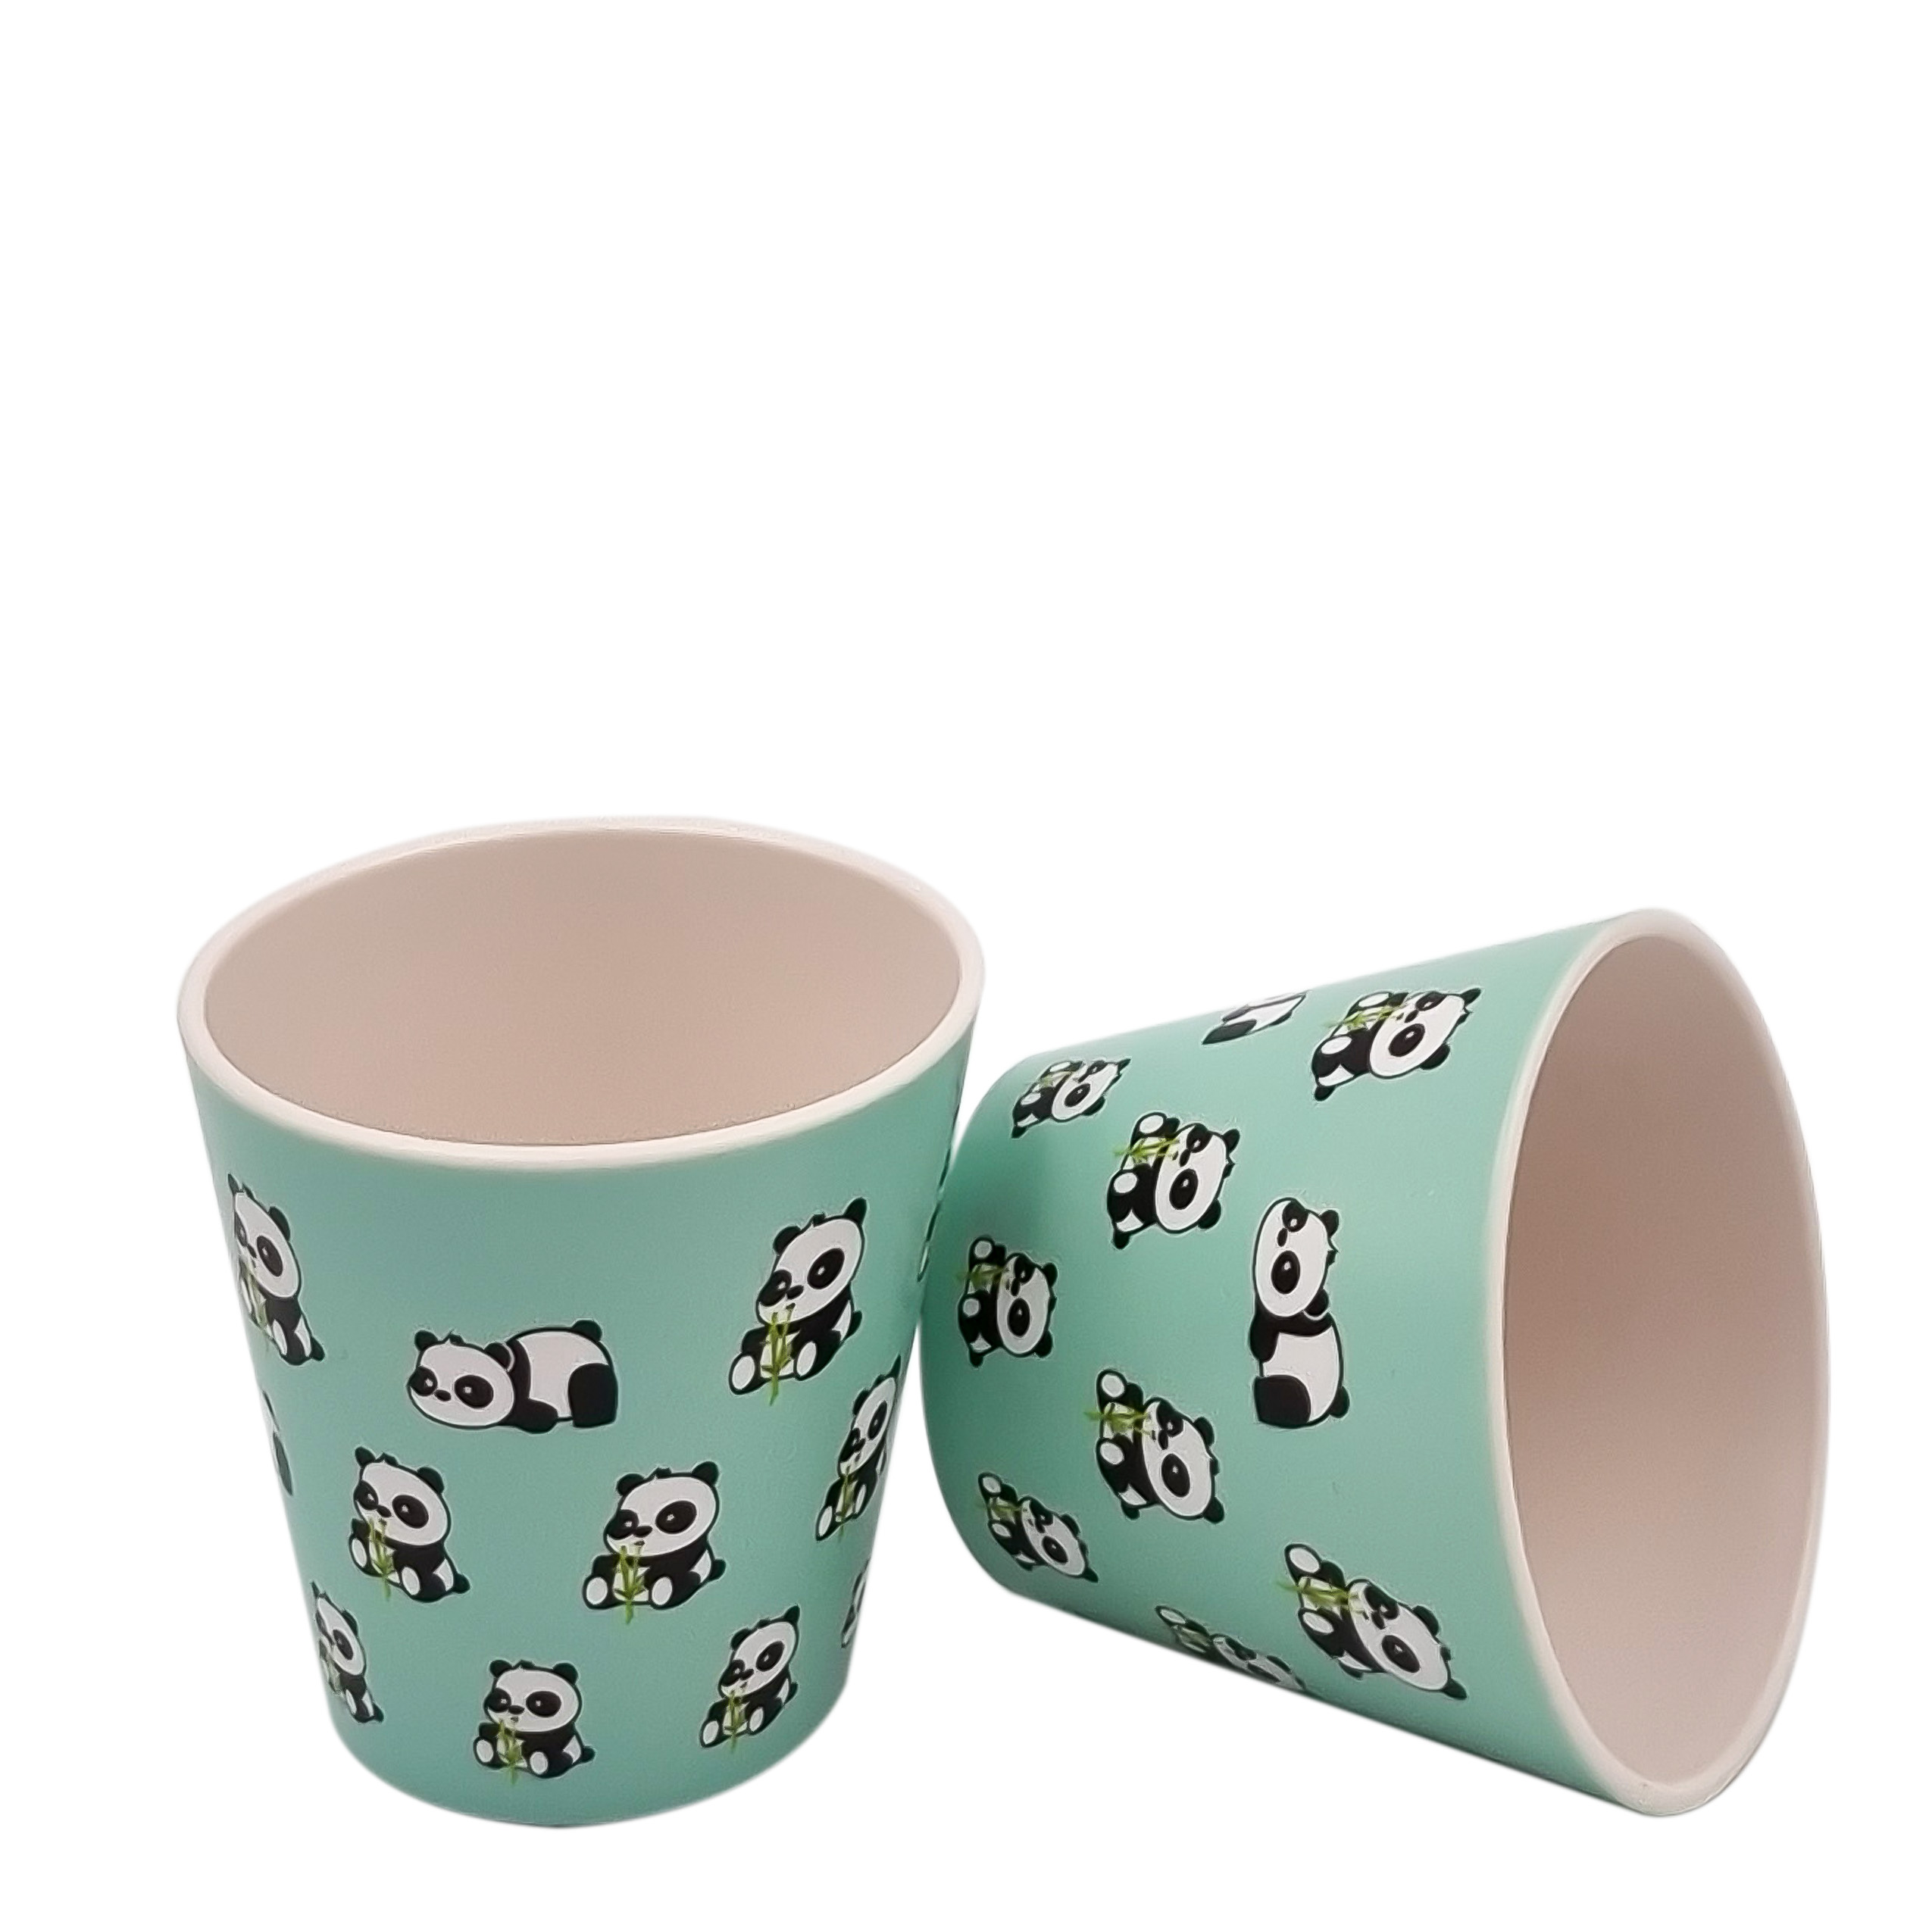 Quy Cup Panda Tazzine caffè ecologica Quy CUP